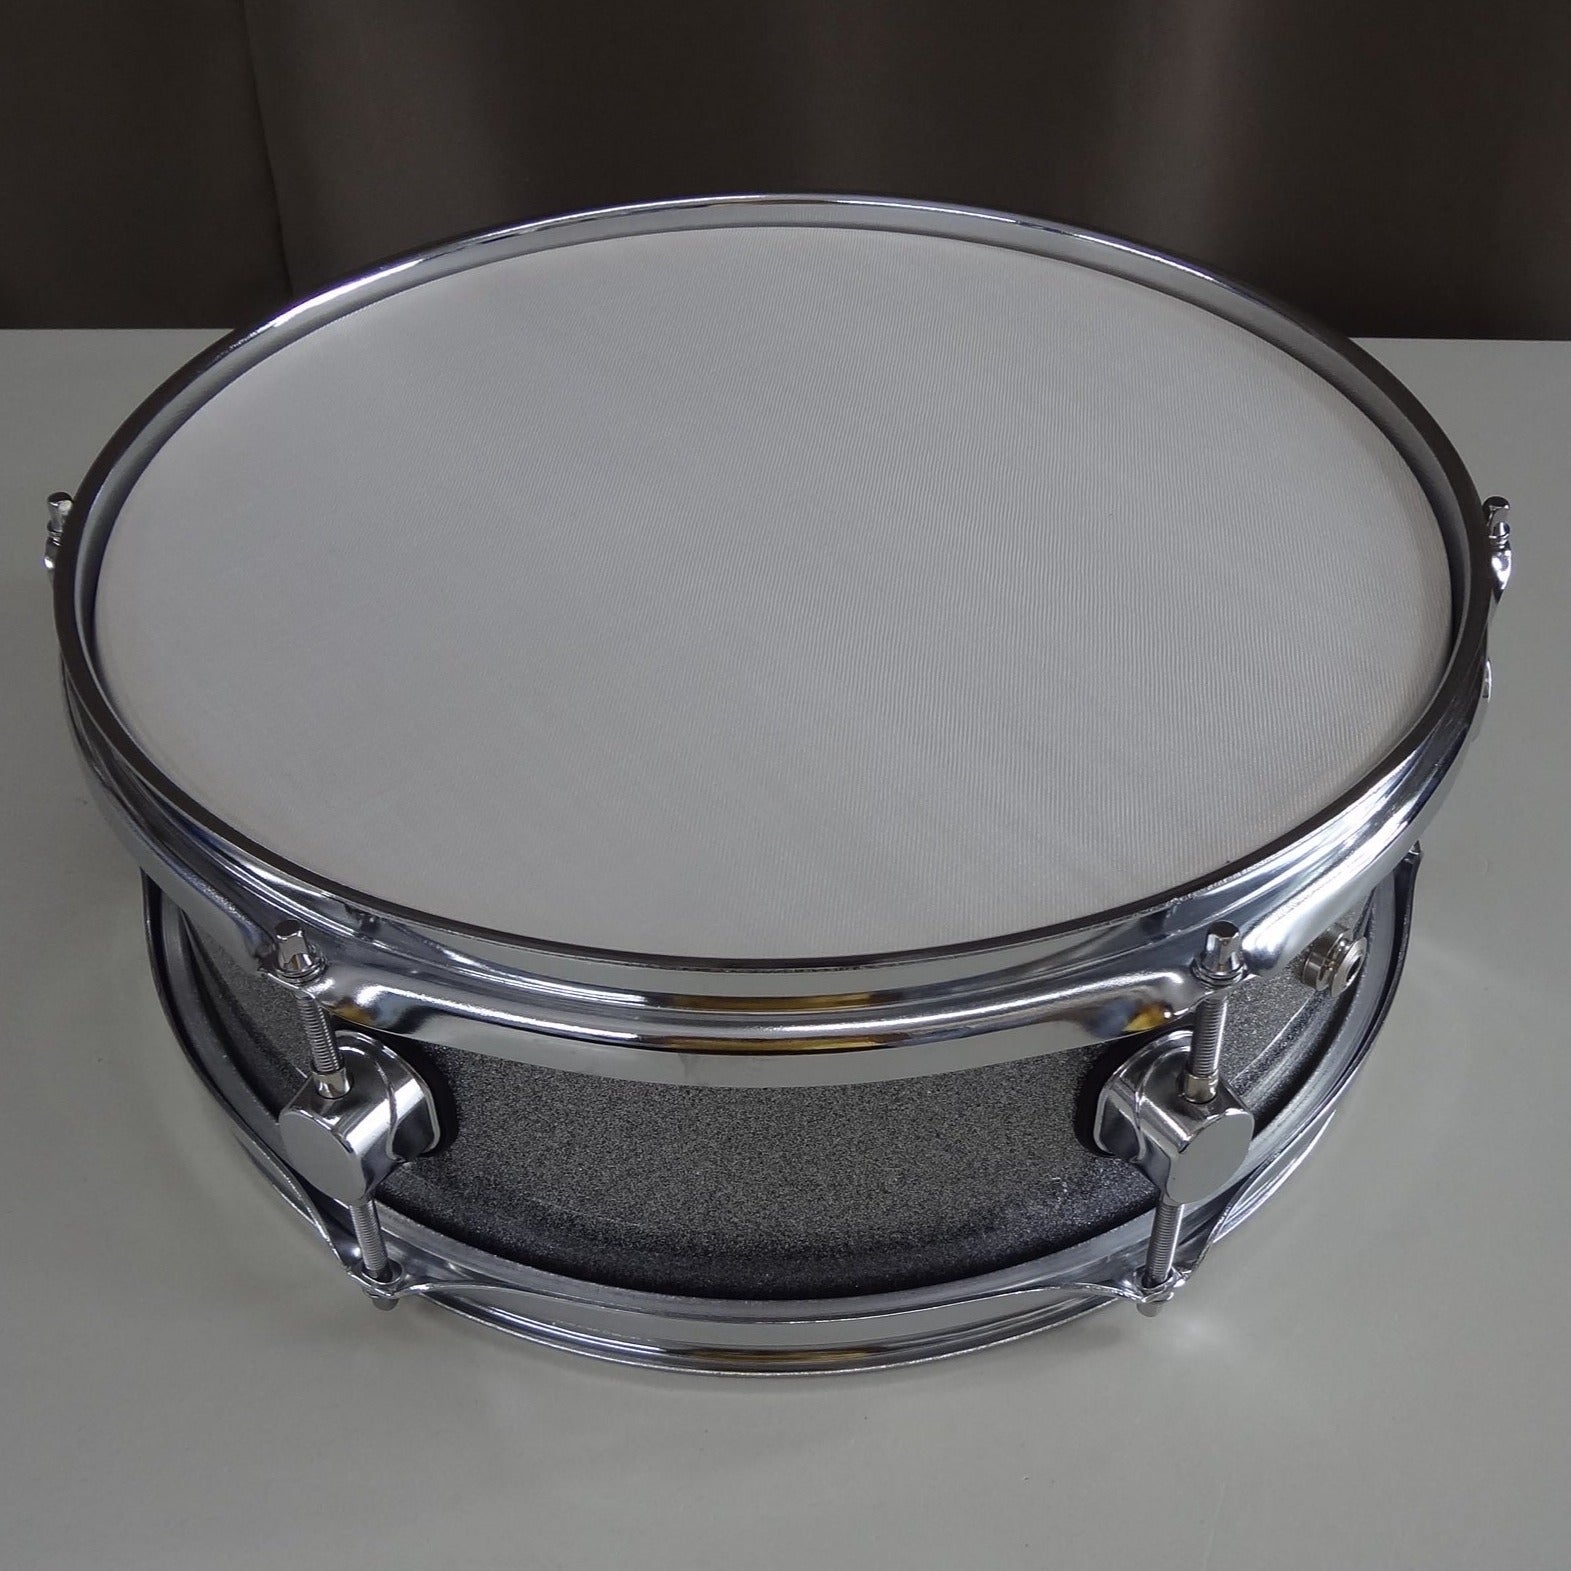 Top down view of new 13 inch custom electronic snare drum silver sparkle wrap